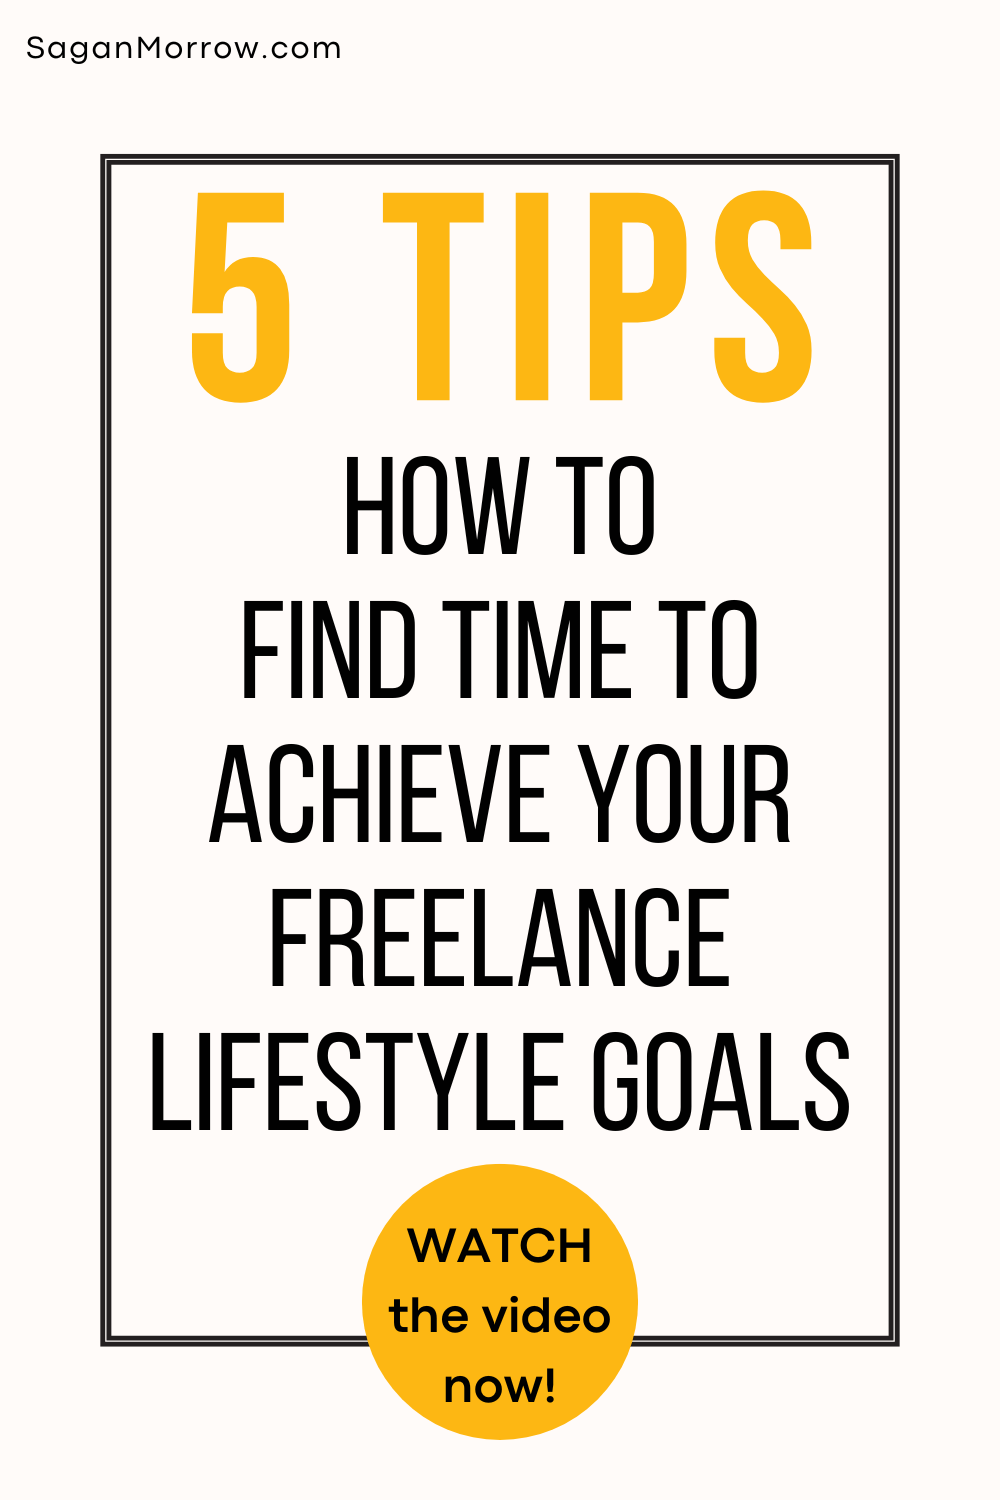 5 tips for how to find time to achieve your freelance lifestyle goals